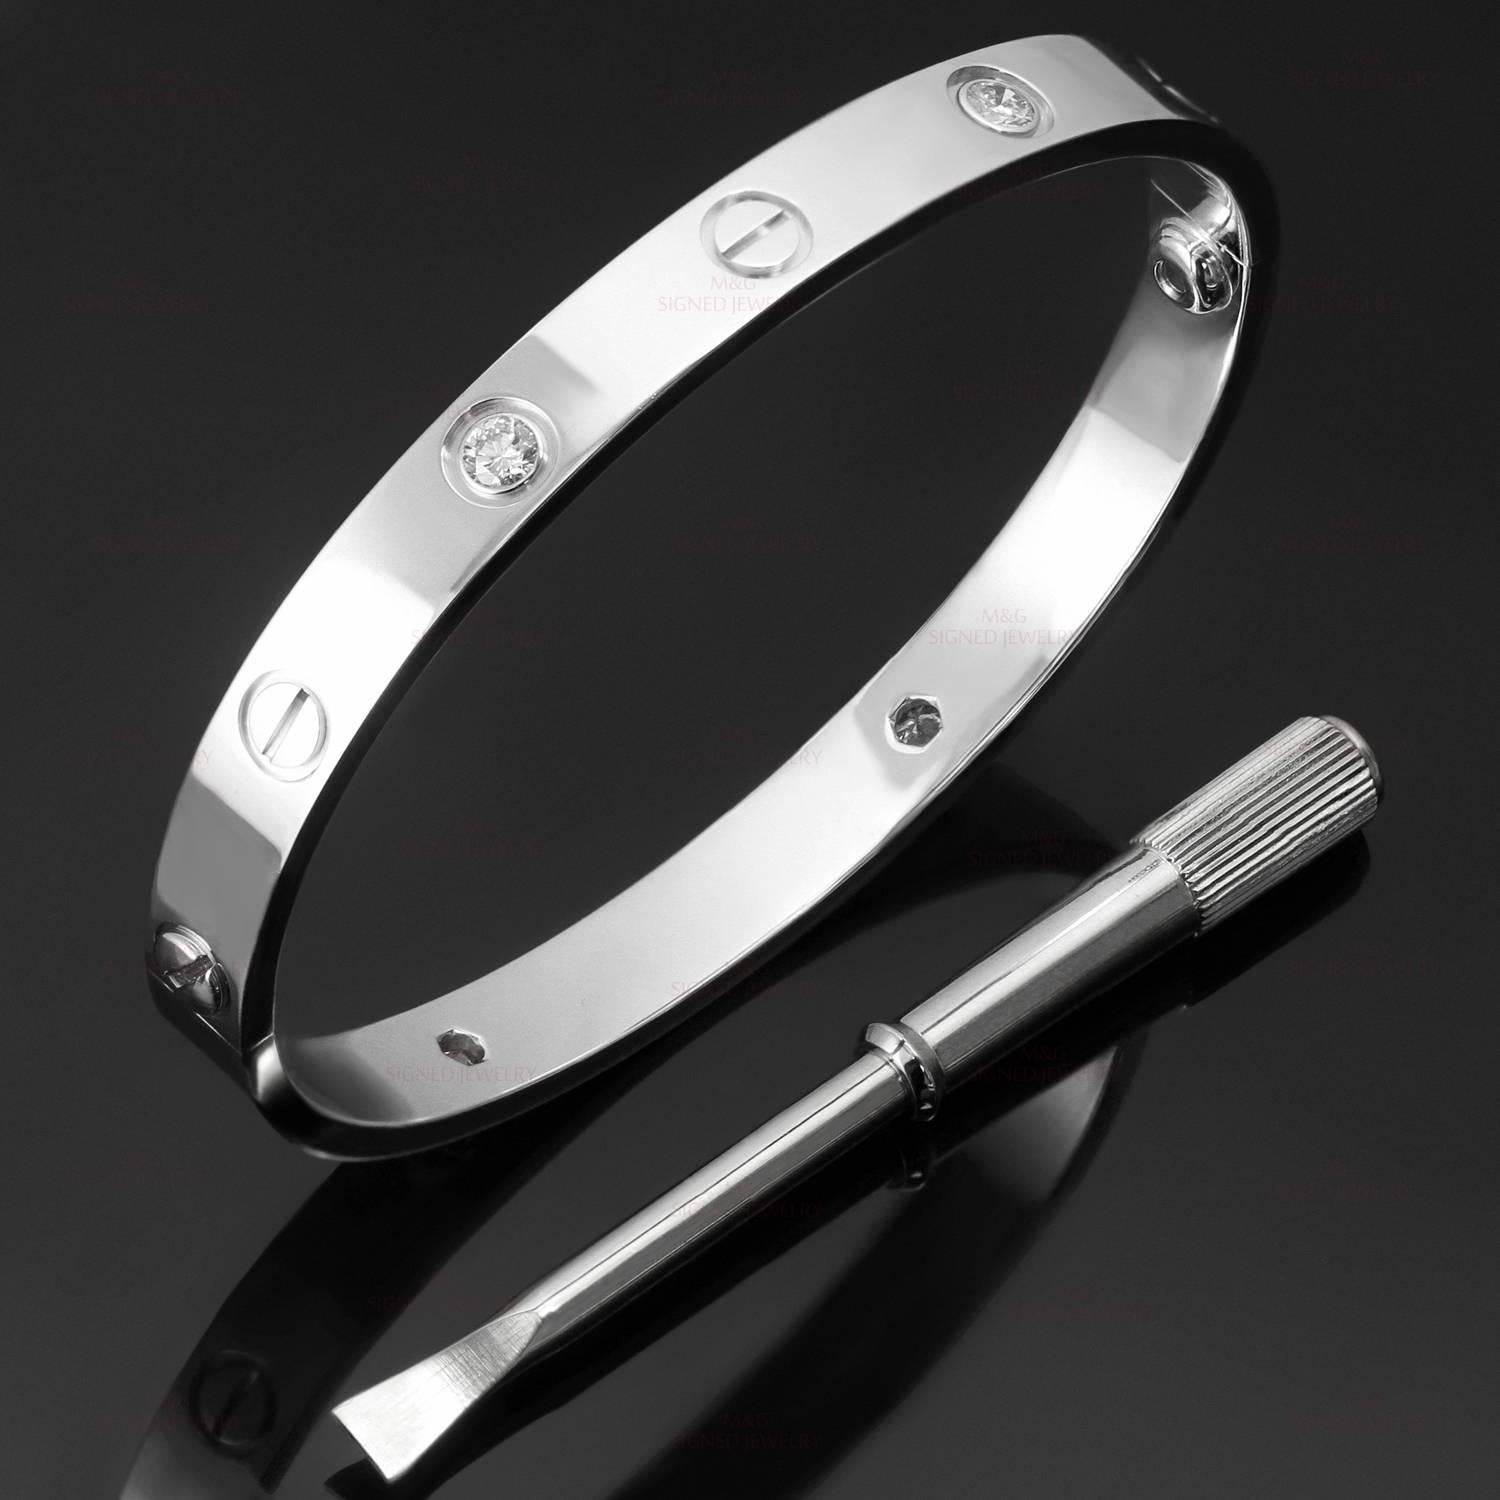 This iconic and timeless bracelet from Cartier's Love collection is crafted in 18k white gold and set with 4 round brilliant-cut diamonds. Completed with the original Cartier screwdriver, box, and papers. This bangle is a size 16.